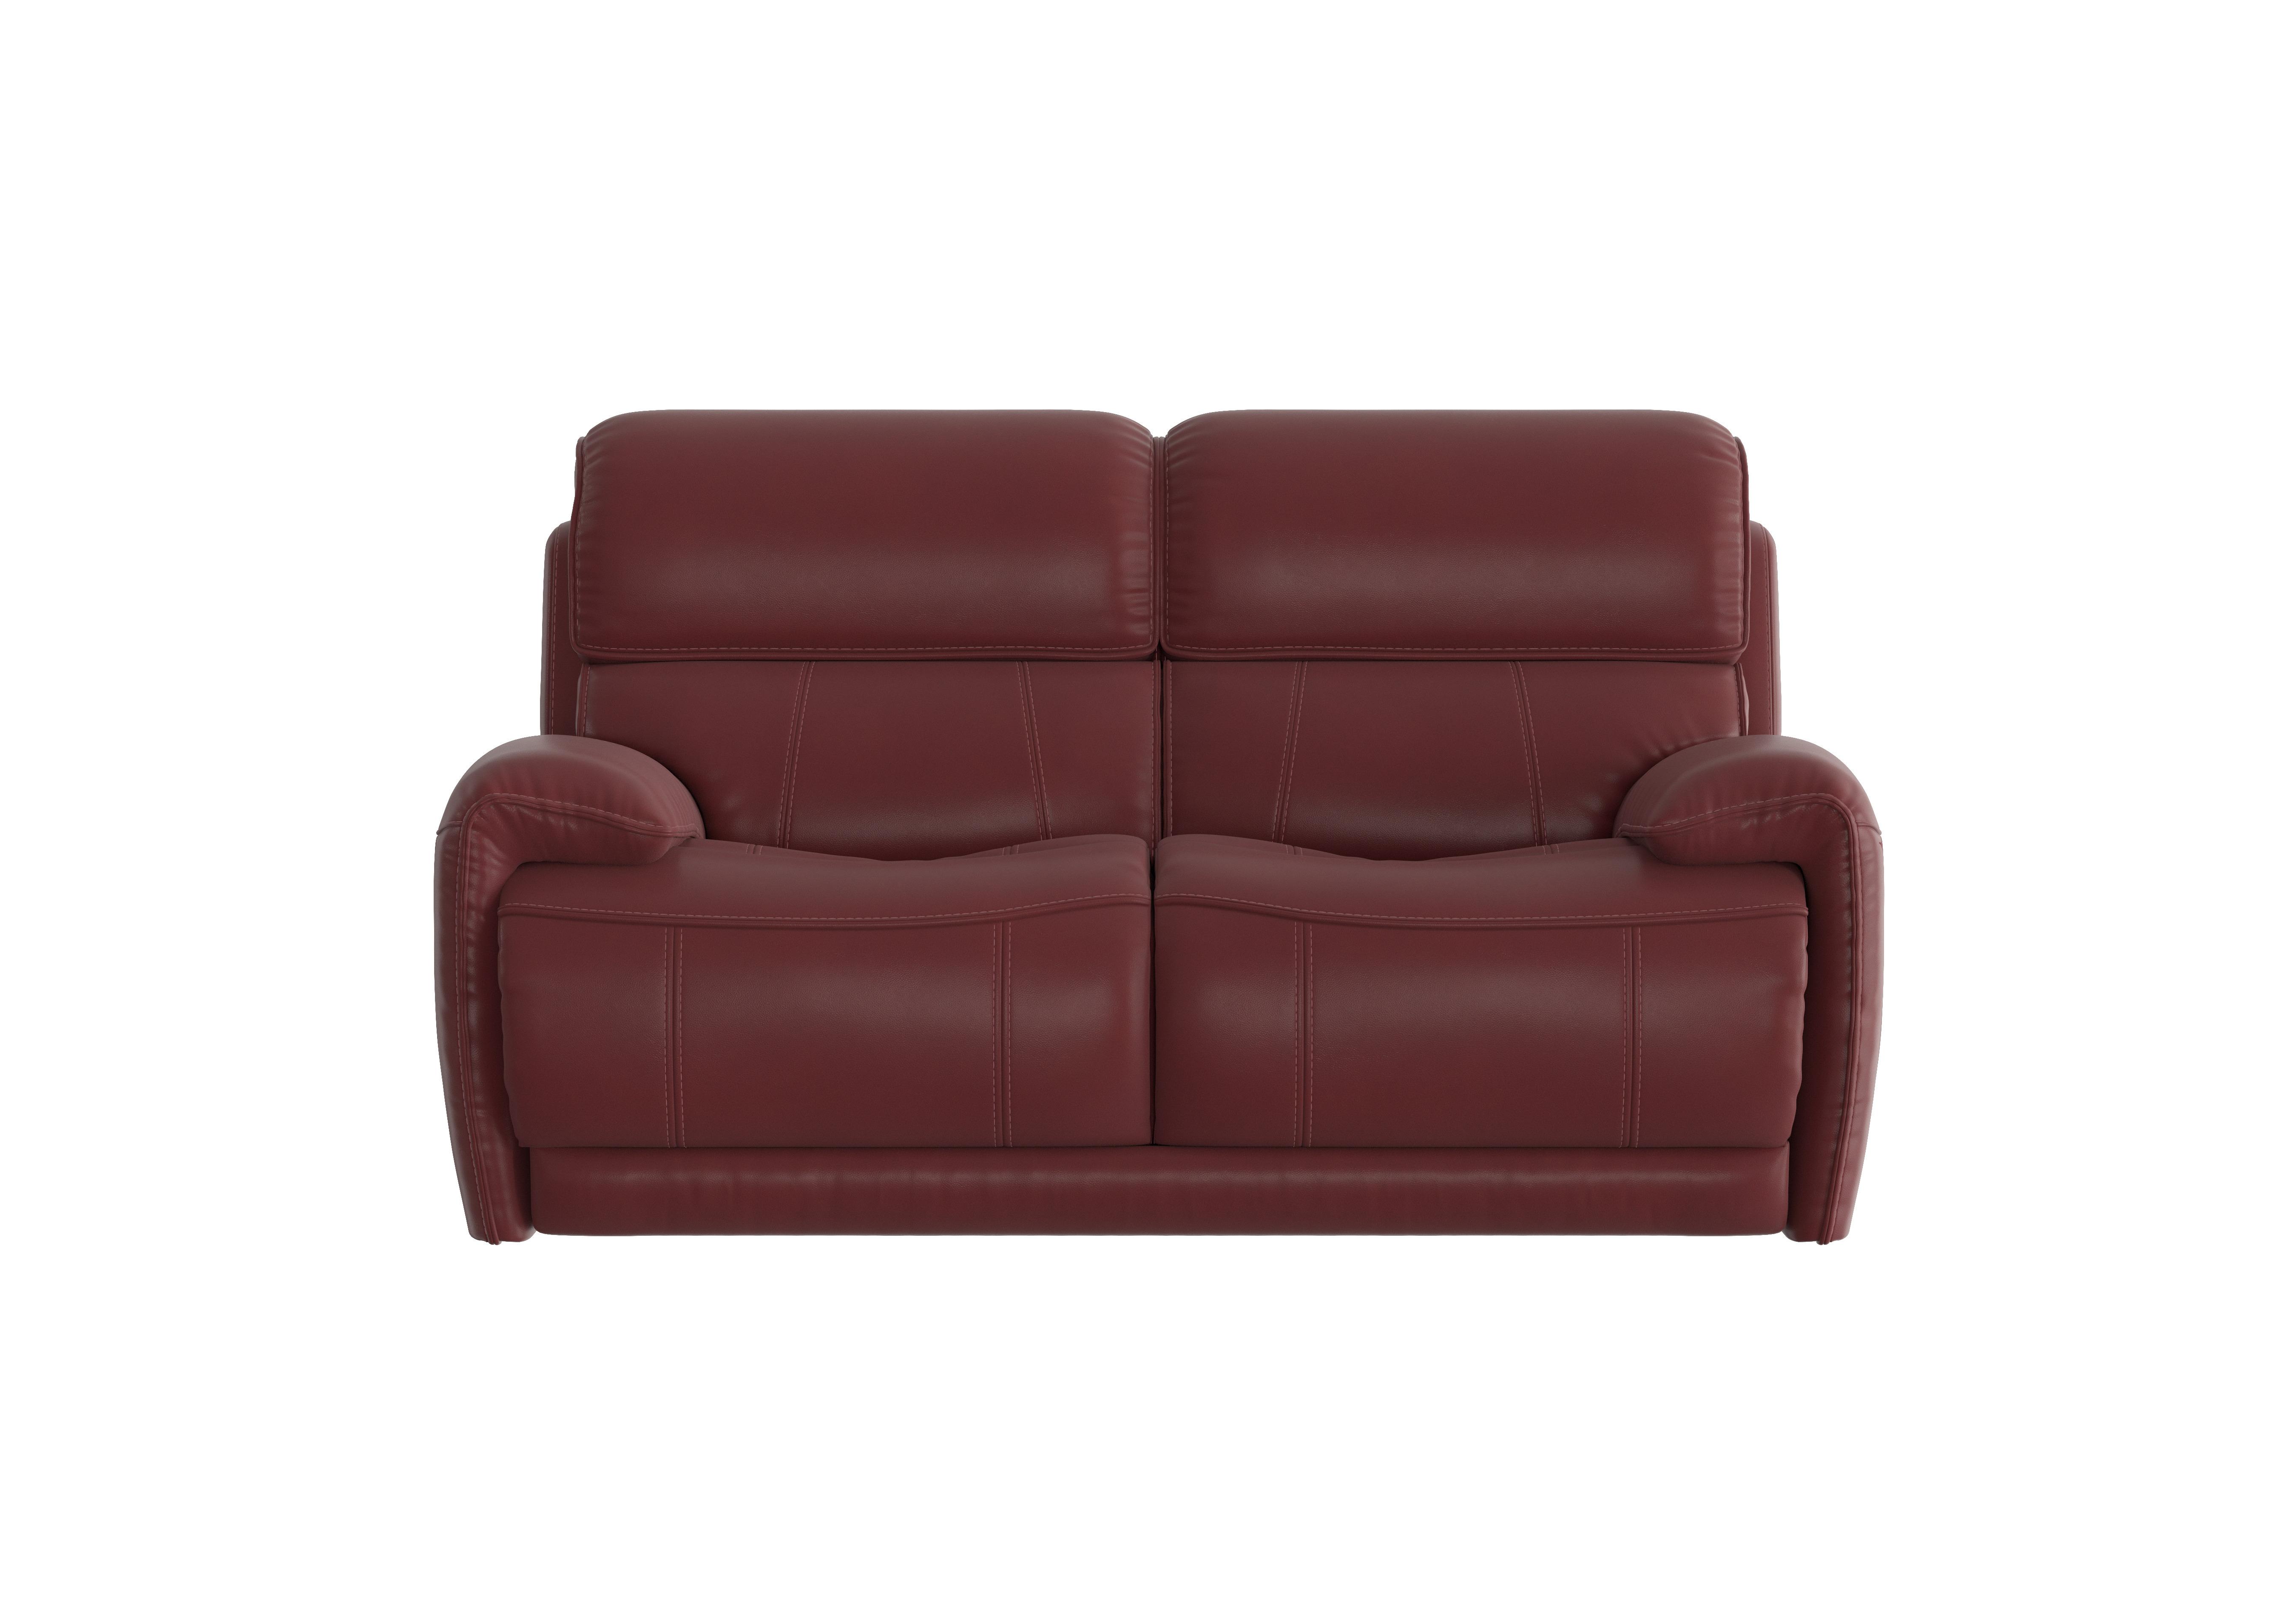 Link 2 Seater Leather Sofa in Bv-035c Deep Red on Furniture Village